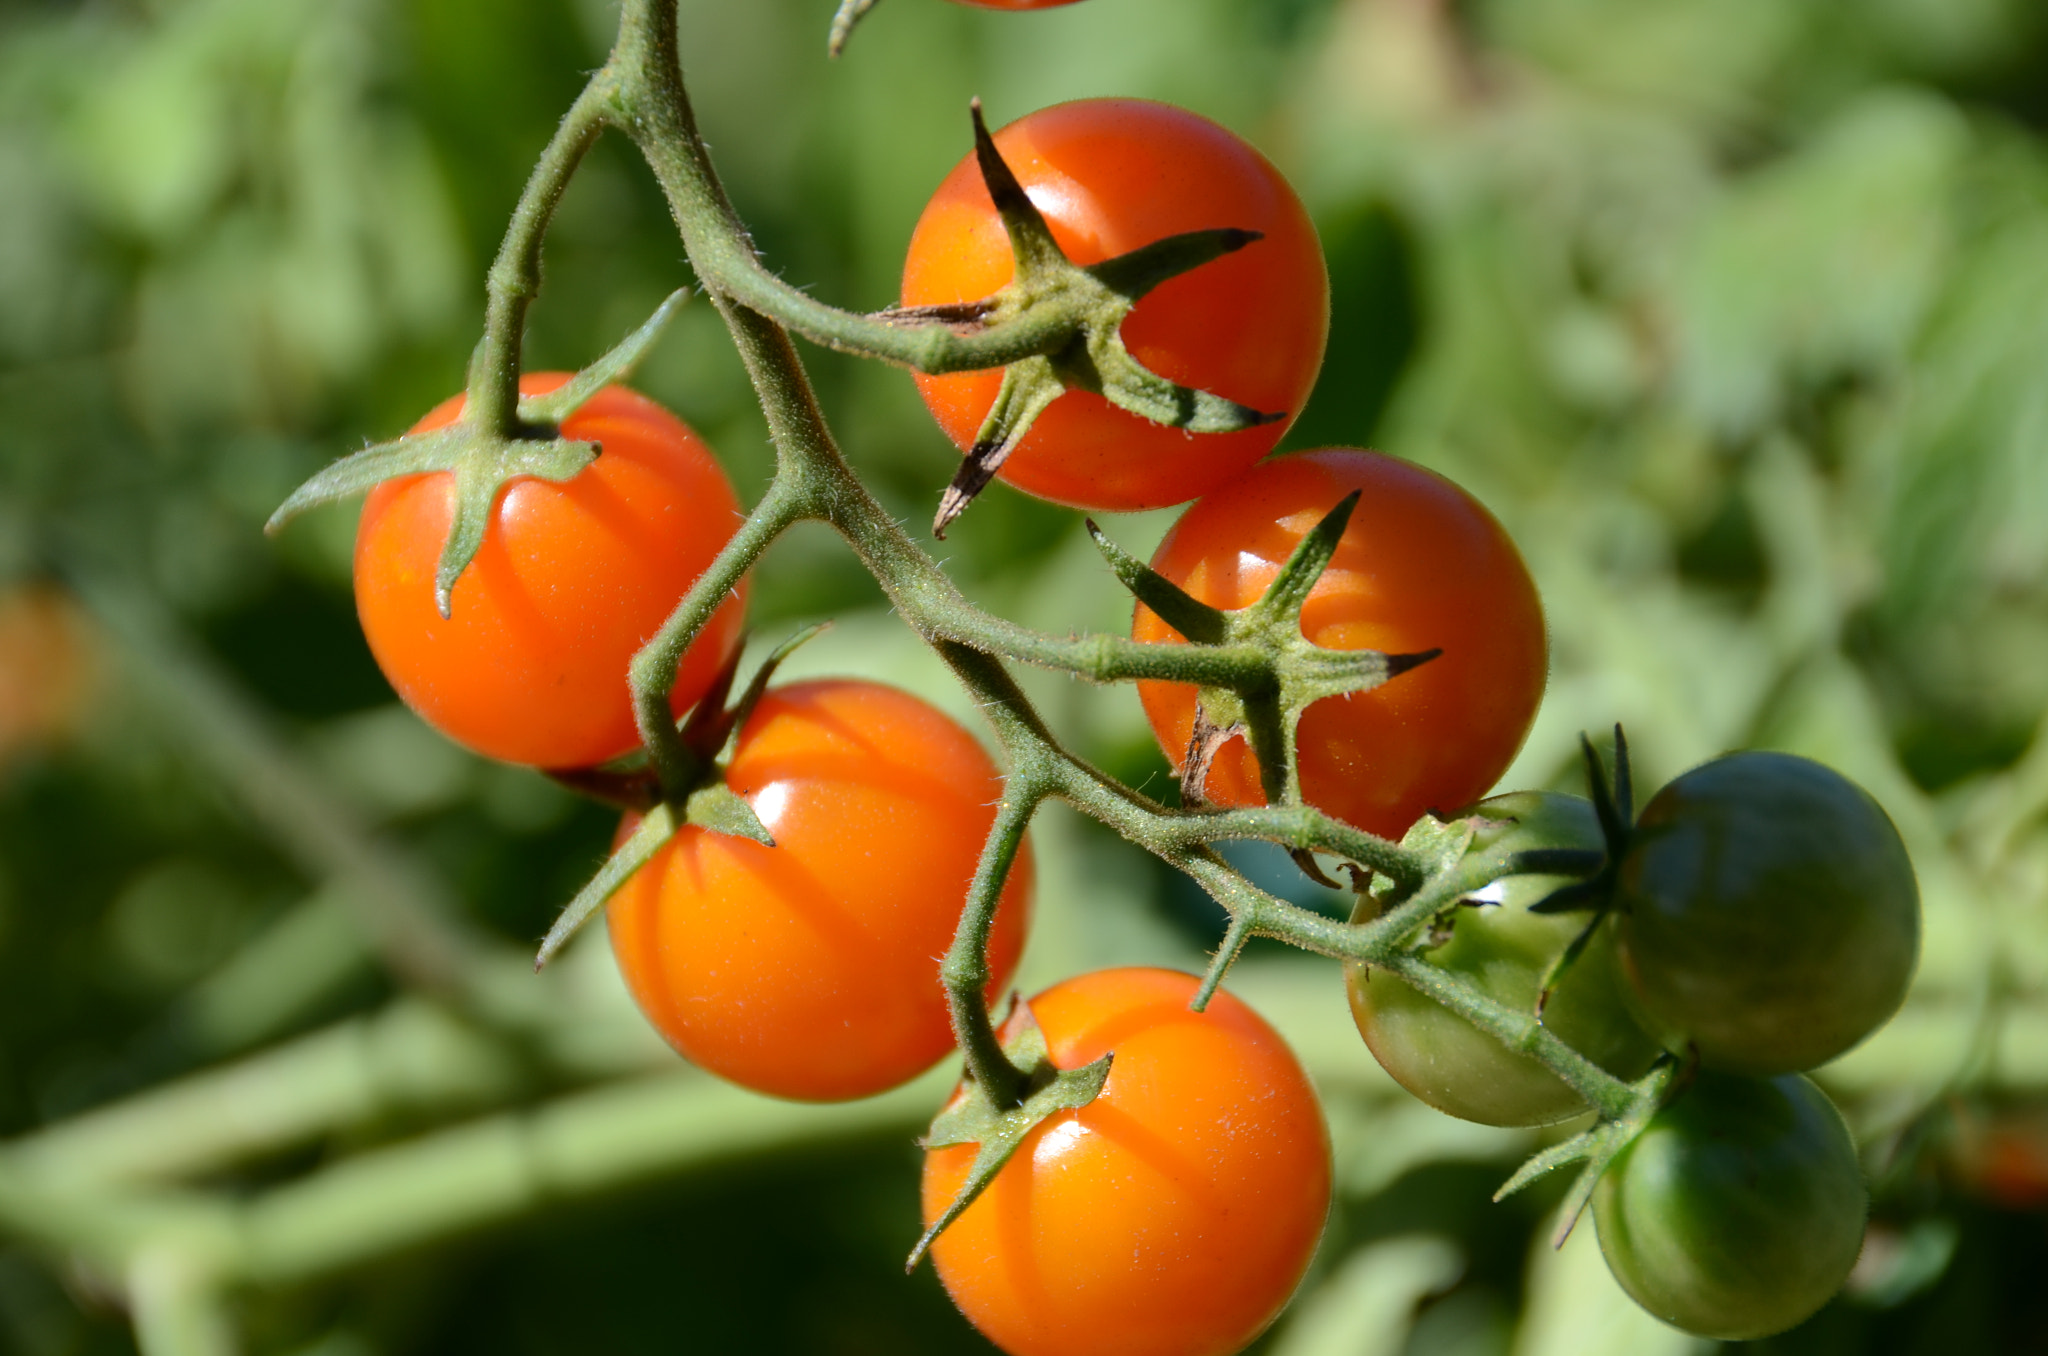 File:Cherry Tomatoes From The Garden (120856447).jpeg - Wikimedia Commons